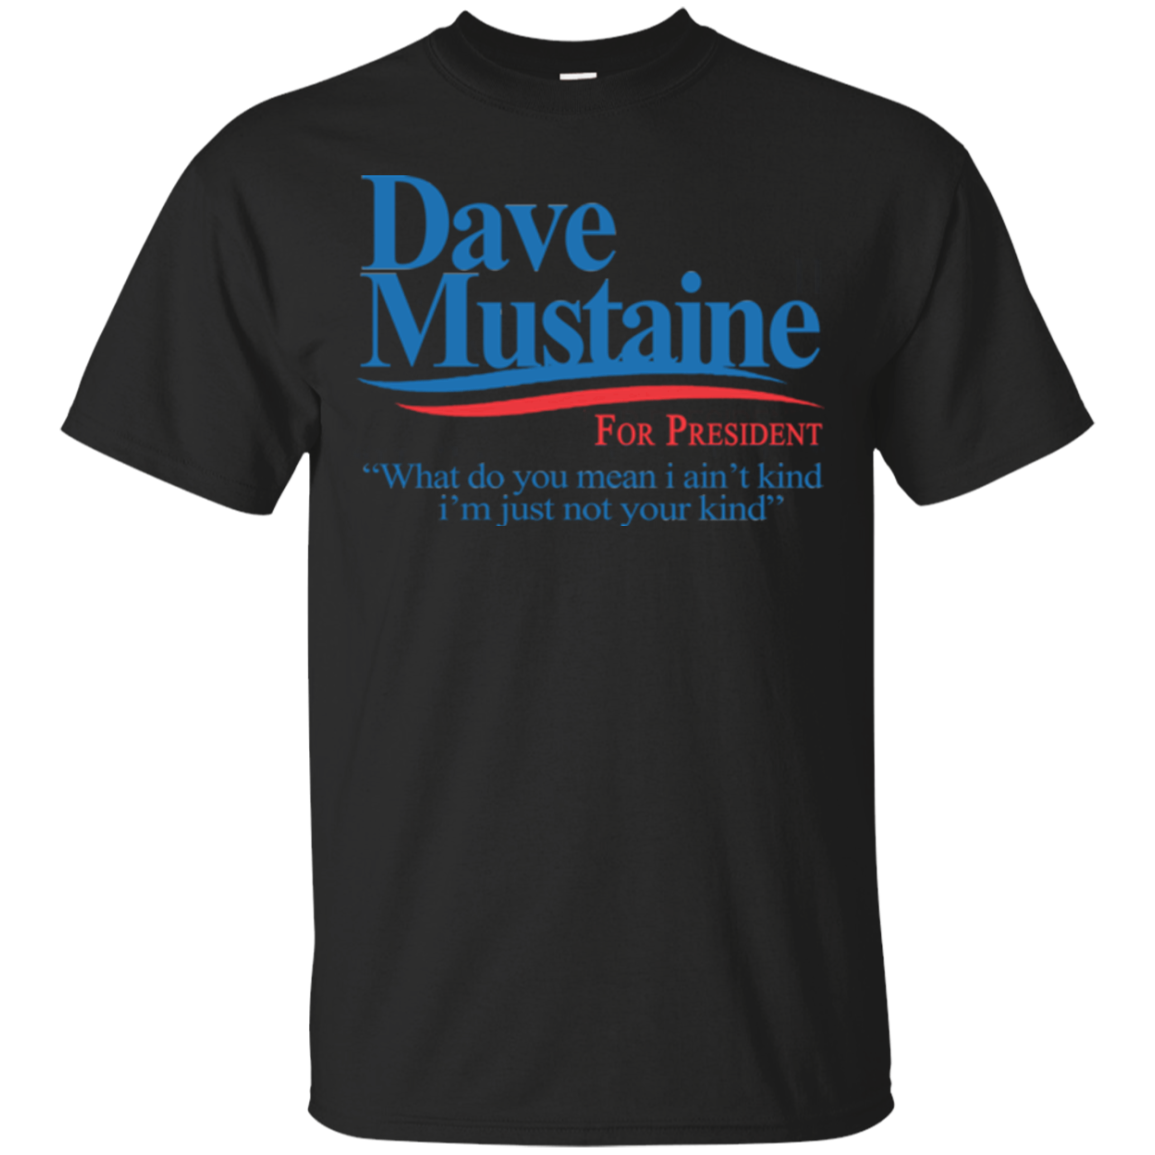 Dave Mustaine For President Shirts What Do You Mean I Ain't Kind ...